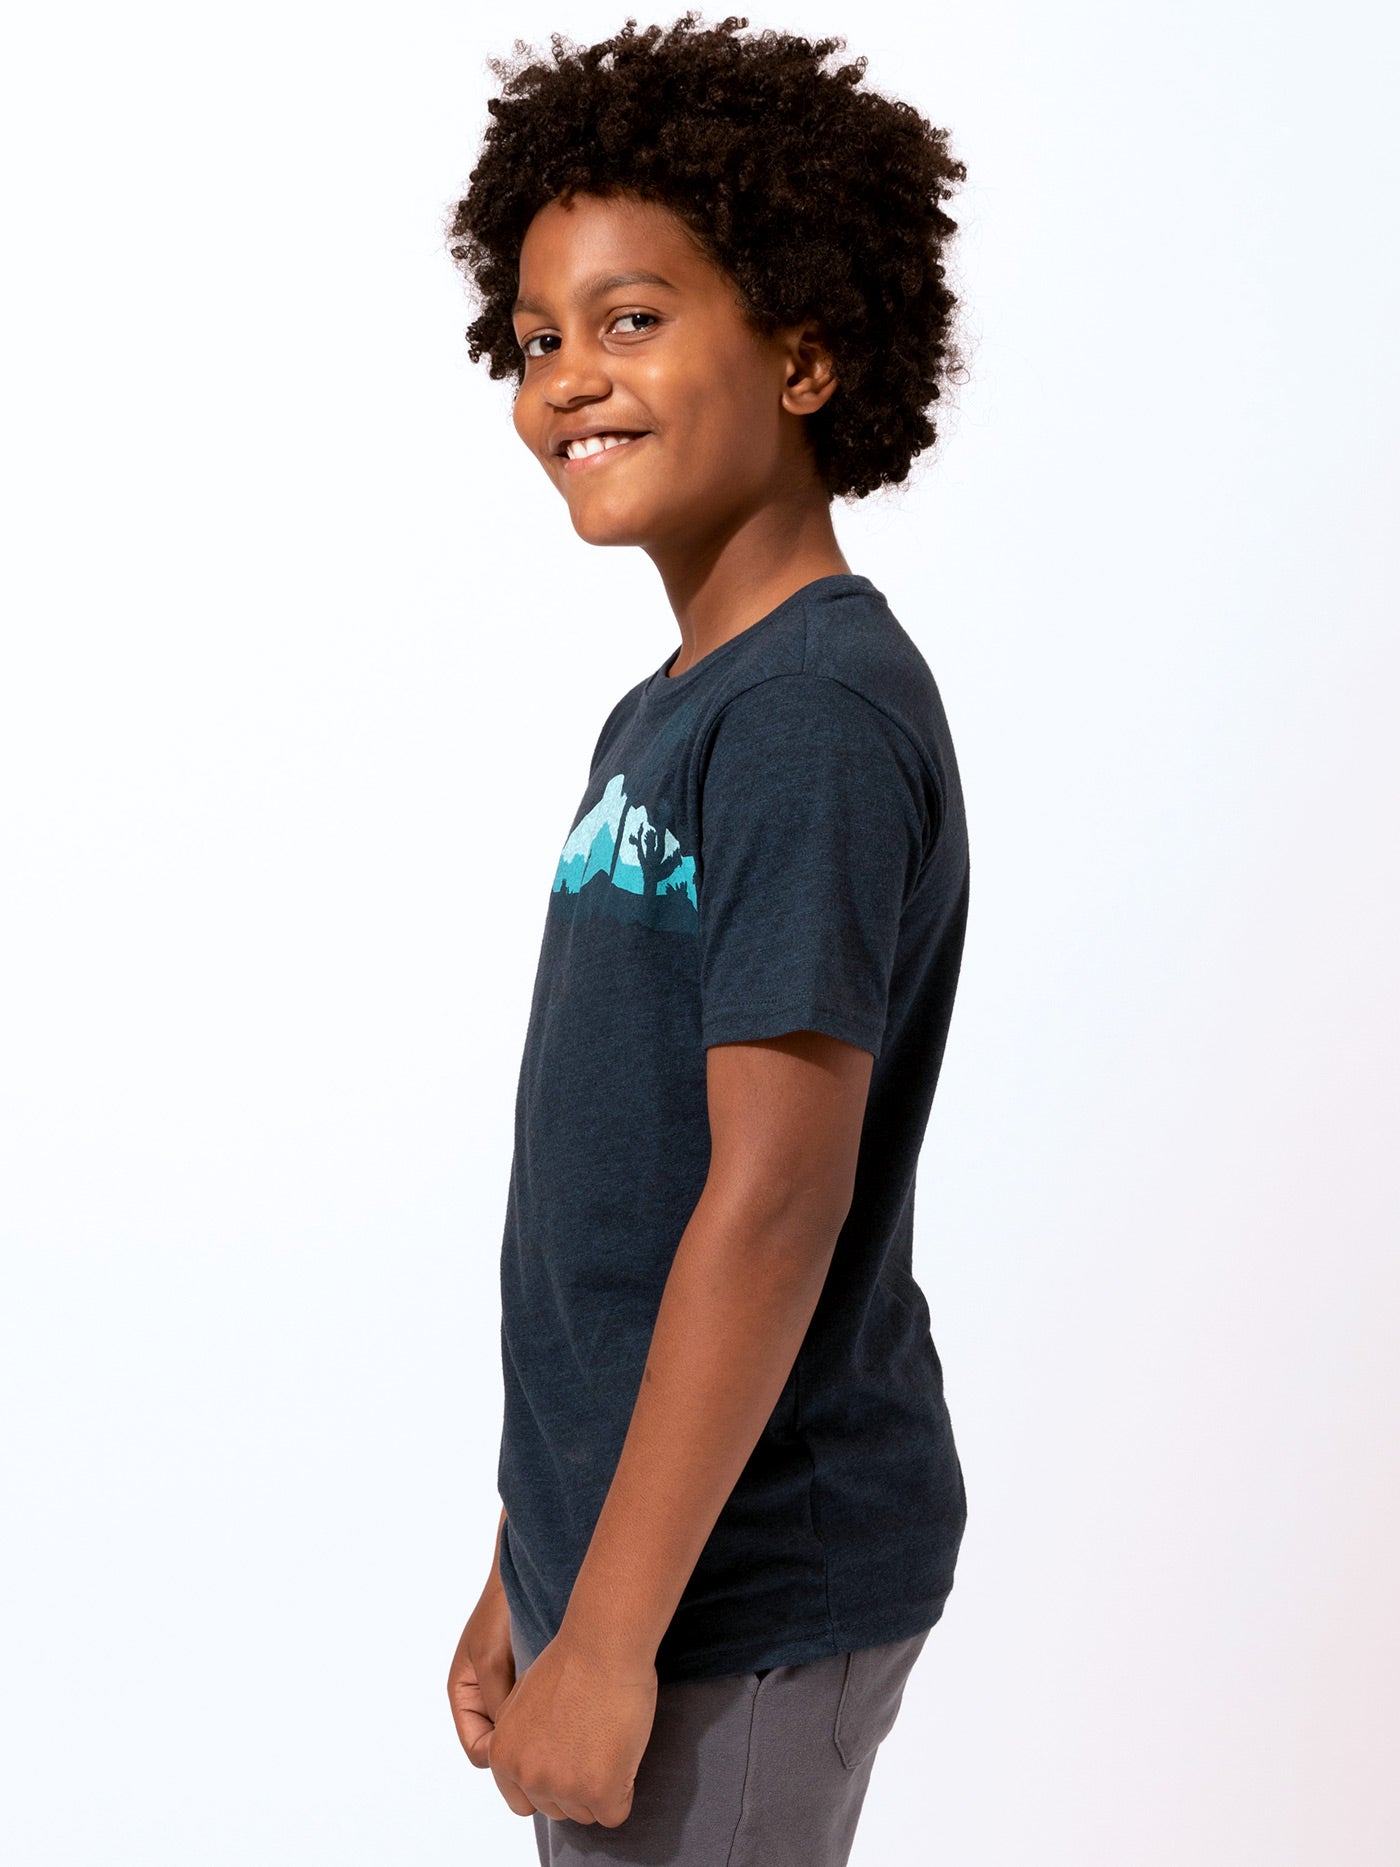 Boy's Mountain Silhouette Graphic Tee Boys Tops Tshirt Threads 4 Thought 